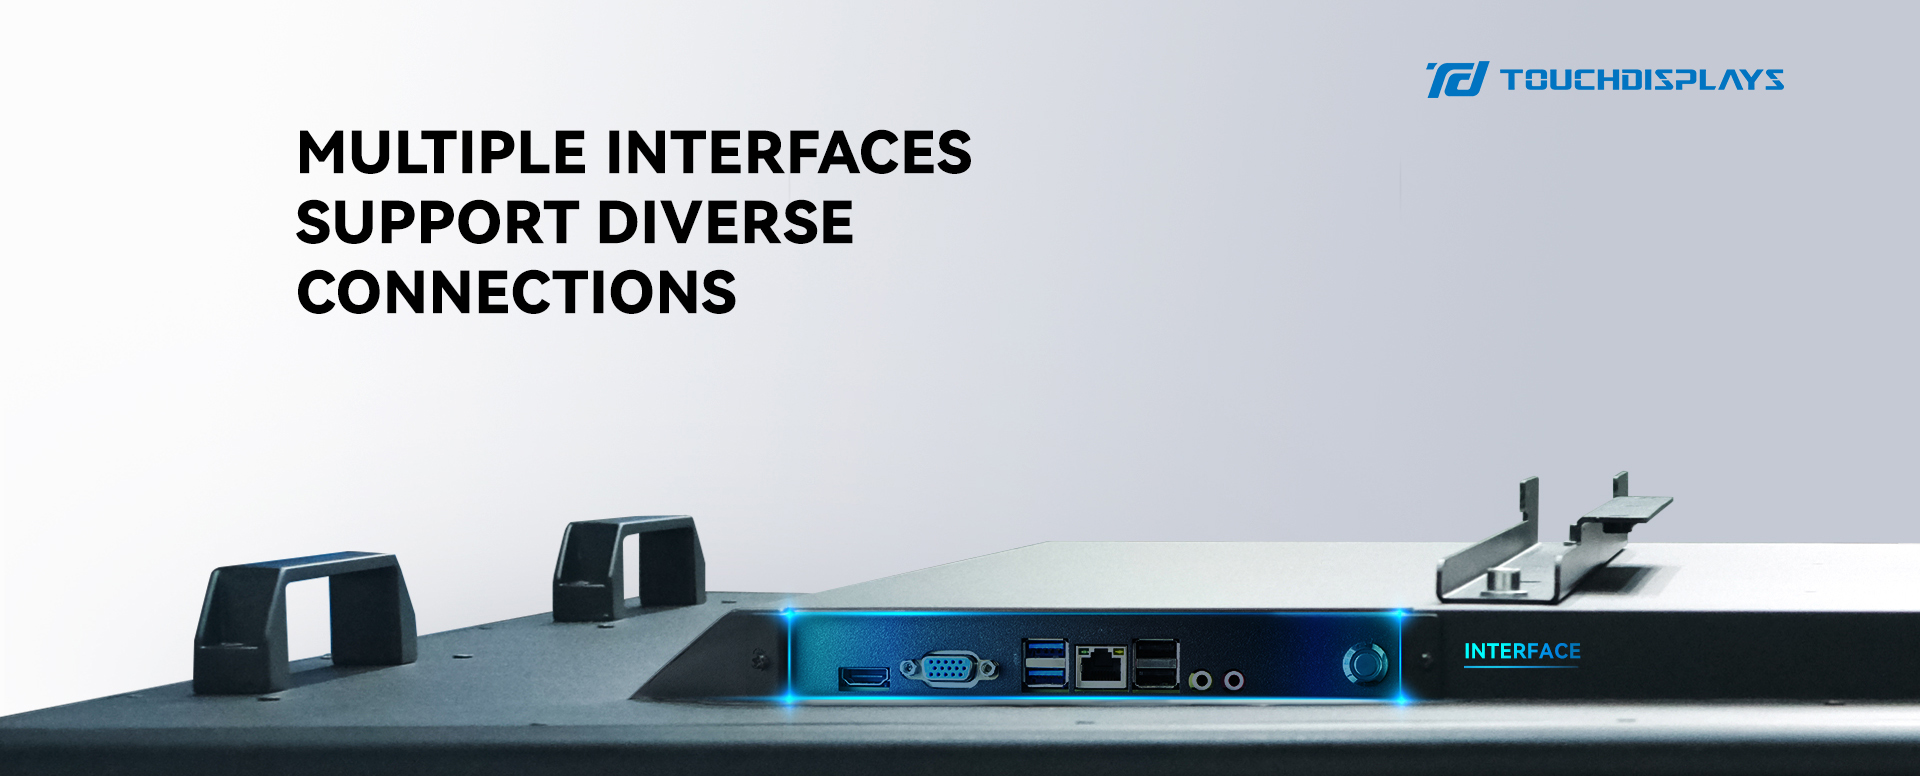 What types of interfaces are commonly used in touch solutions?